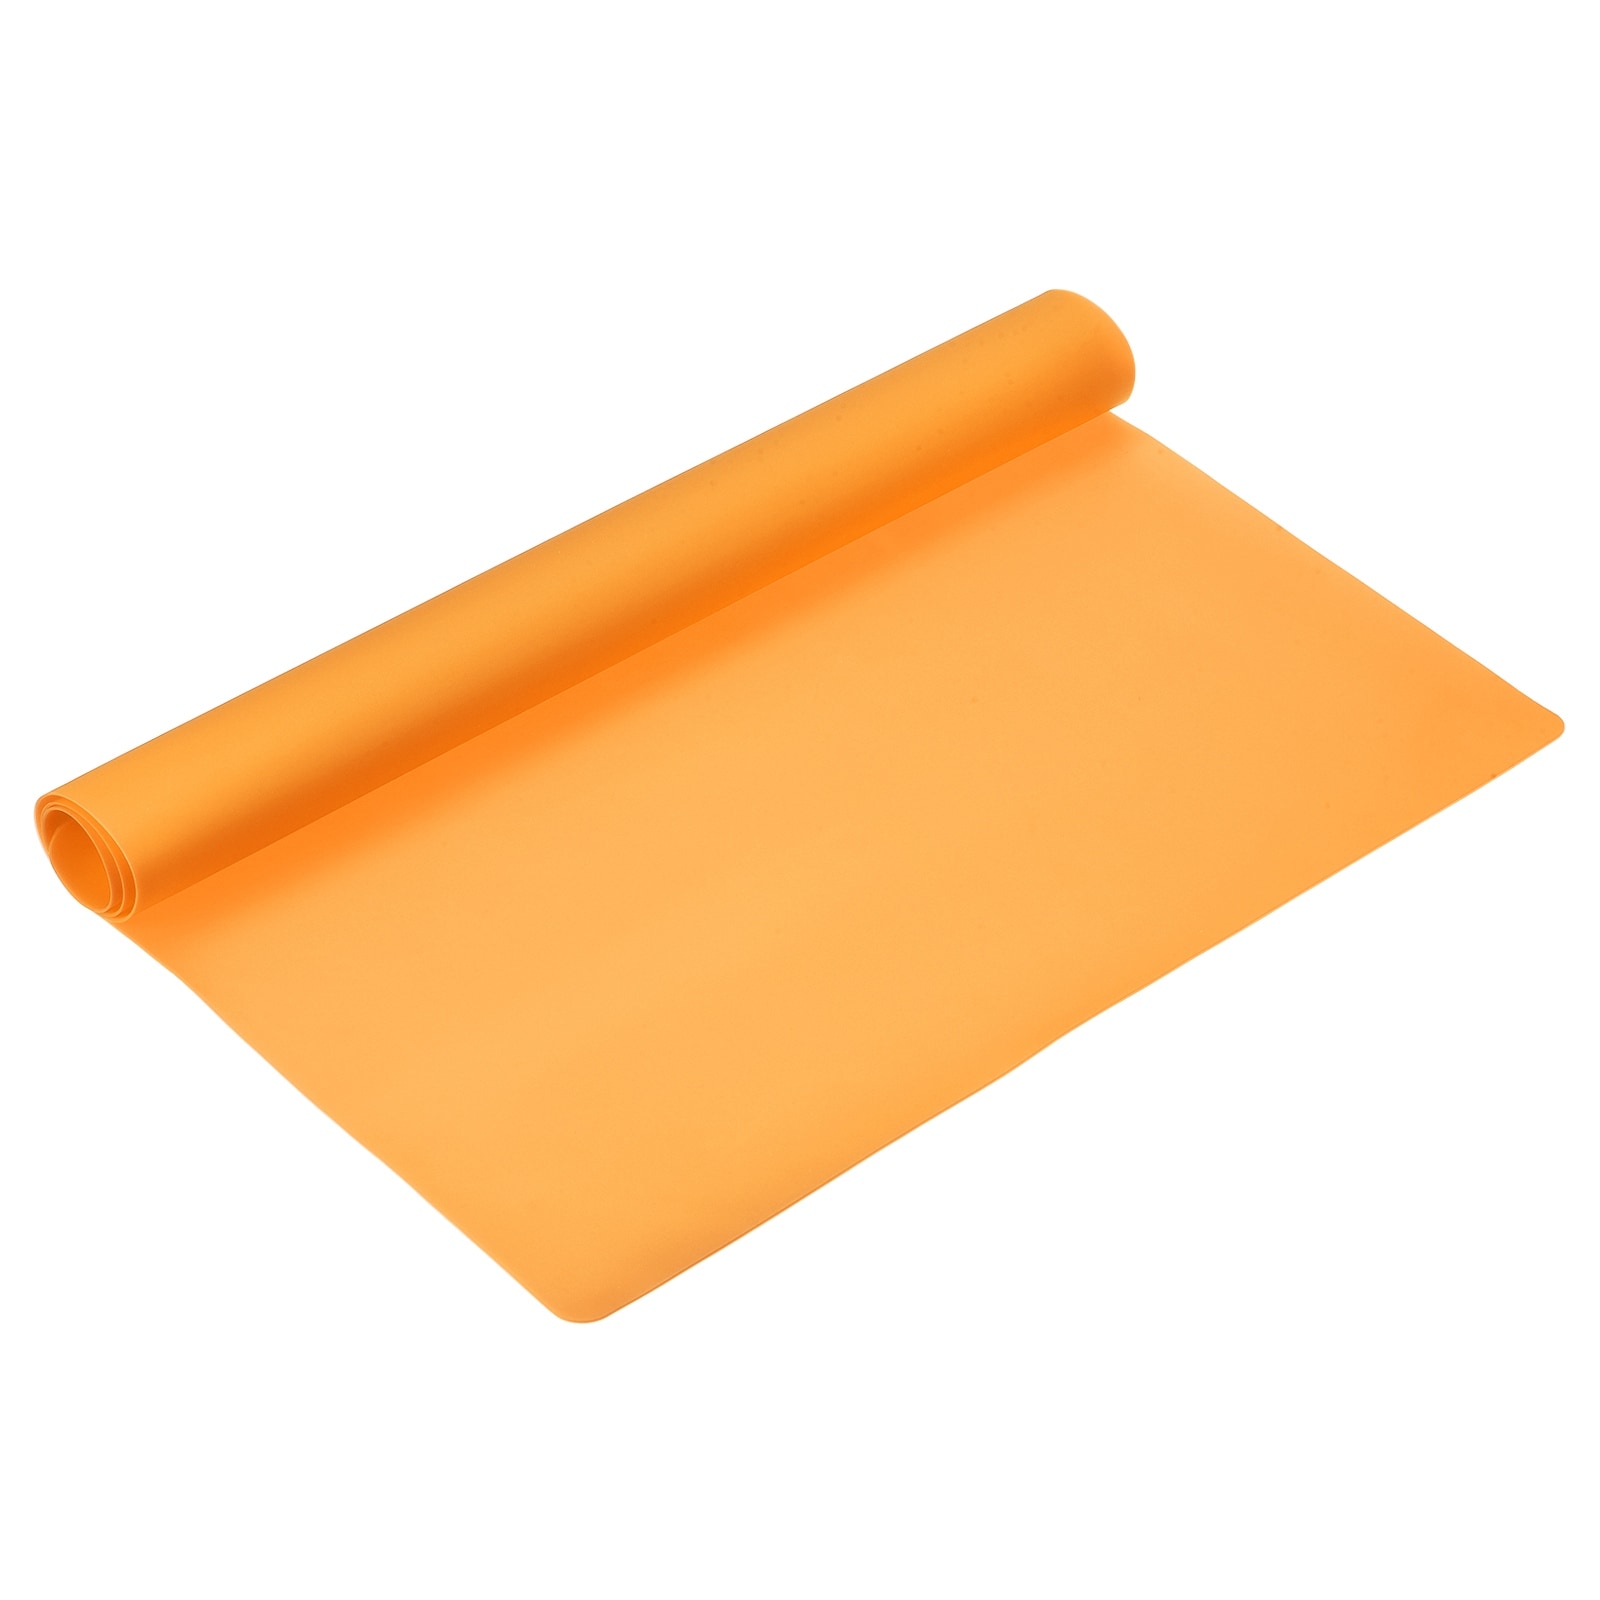 https://ak1.ostkcdn.com/images/products/is/images/direct/5185954253b7ead9aca0191e9f40dc73ce761713/Silicone-Counter-Mat-Heat-Resistant-Mat%2C-for-Counter-Top%2C-Tableware.jpg